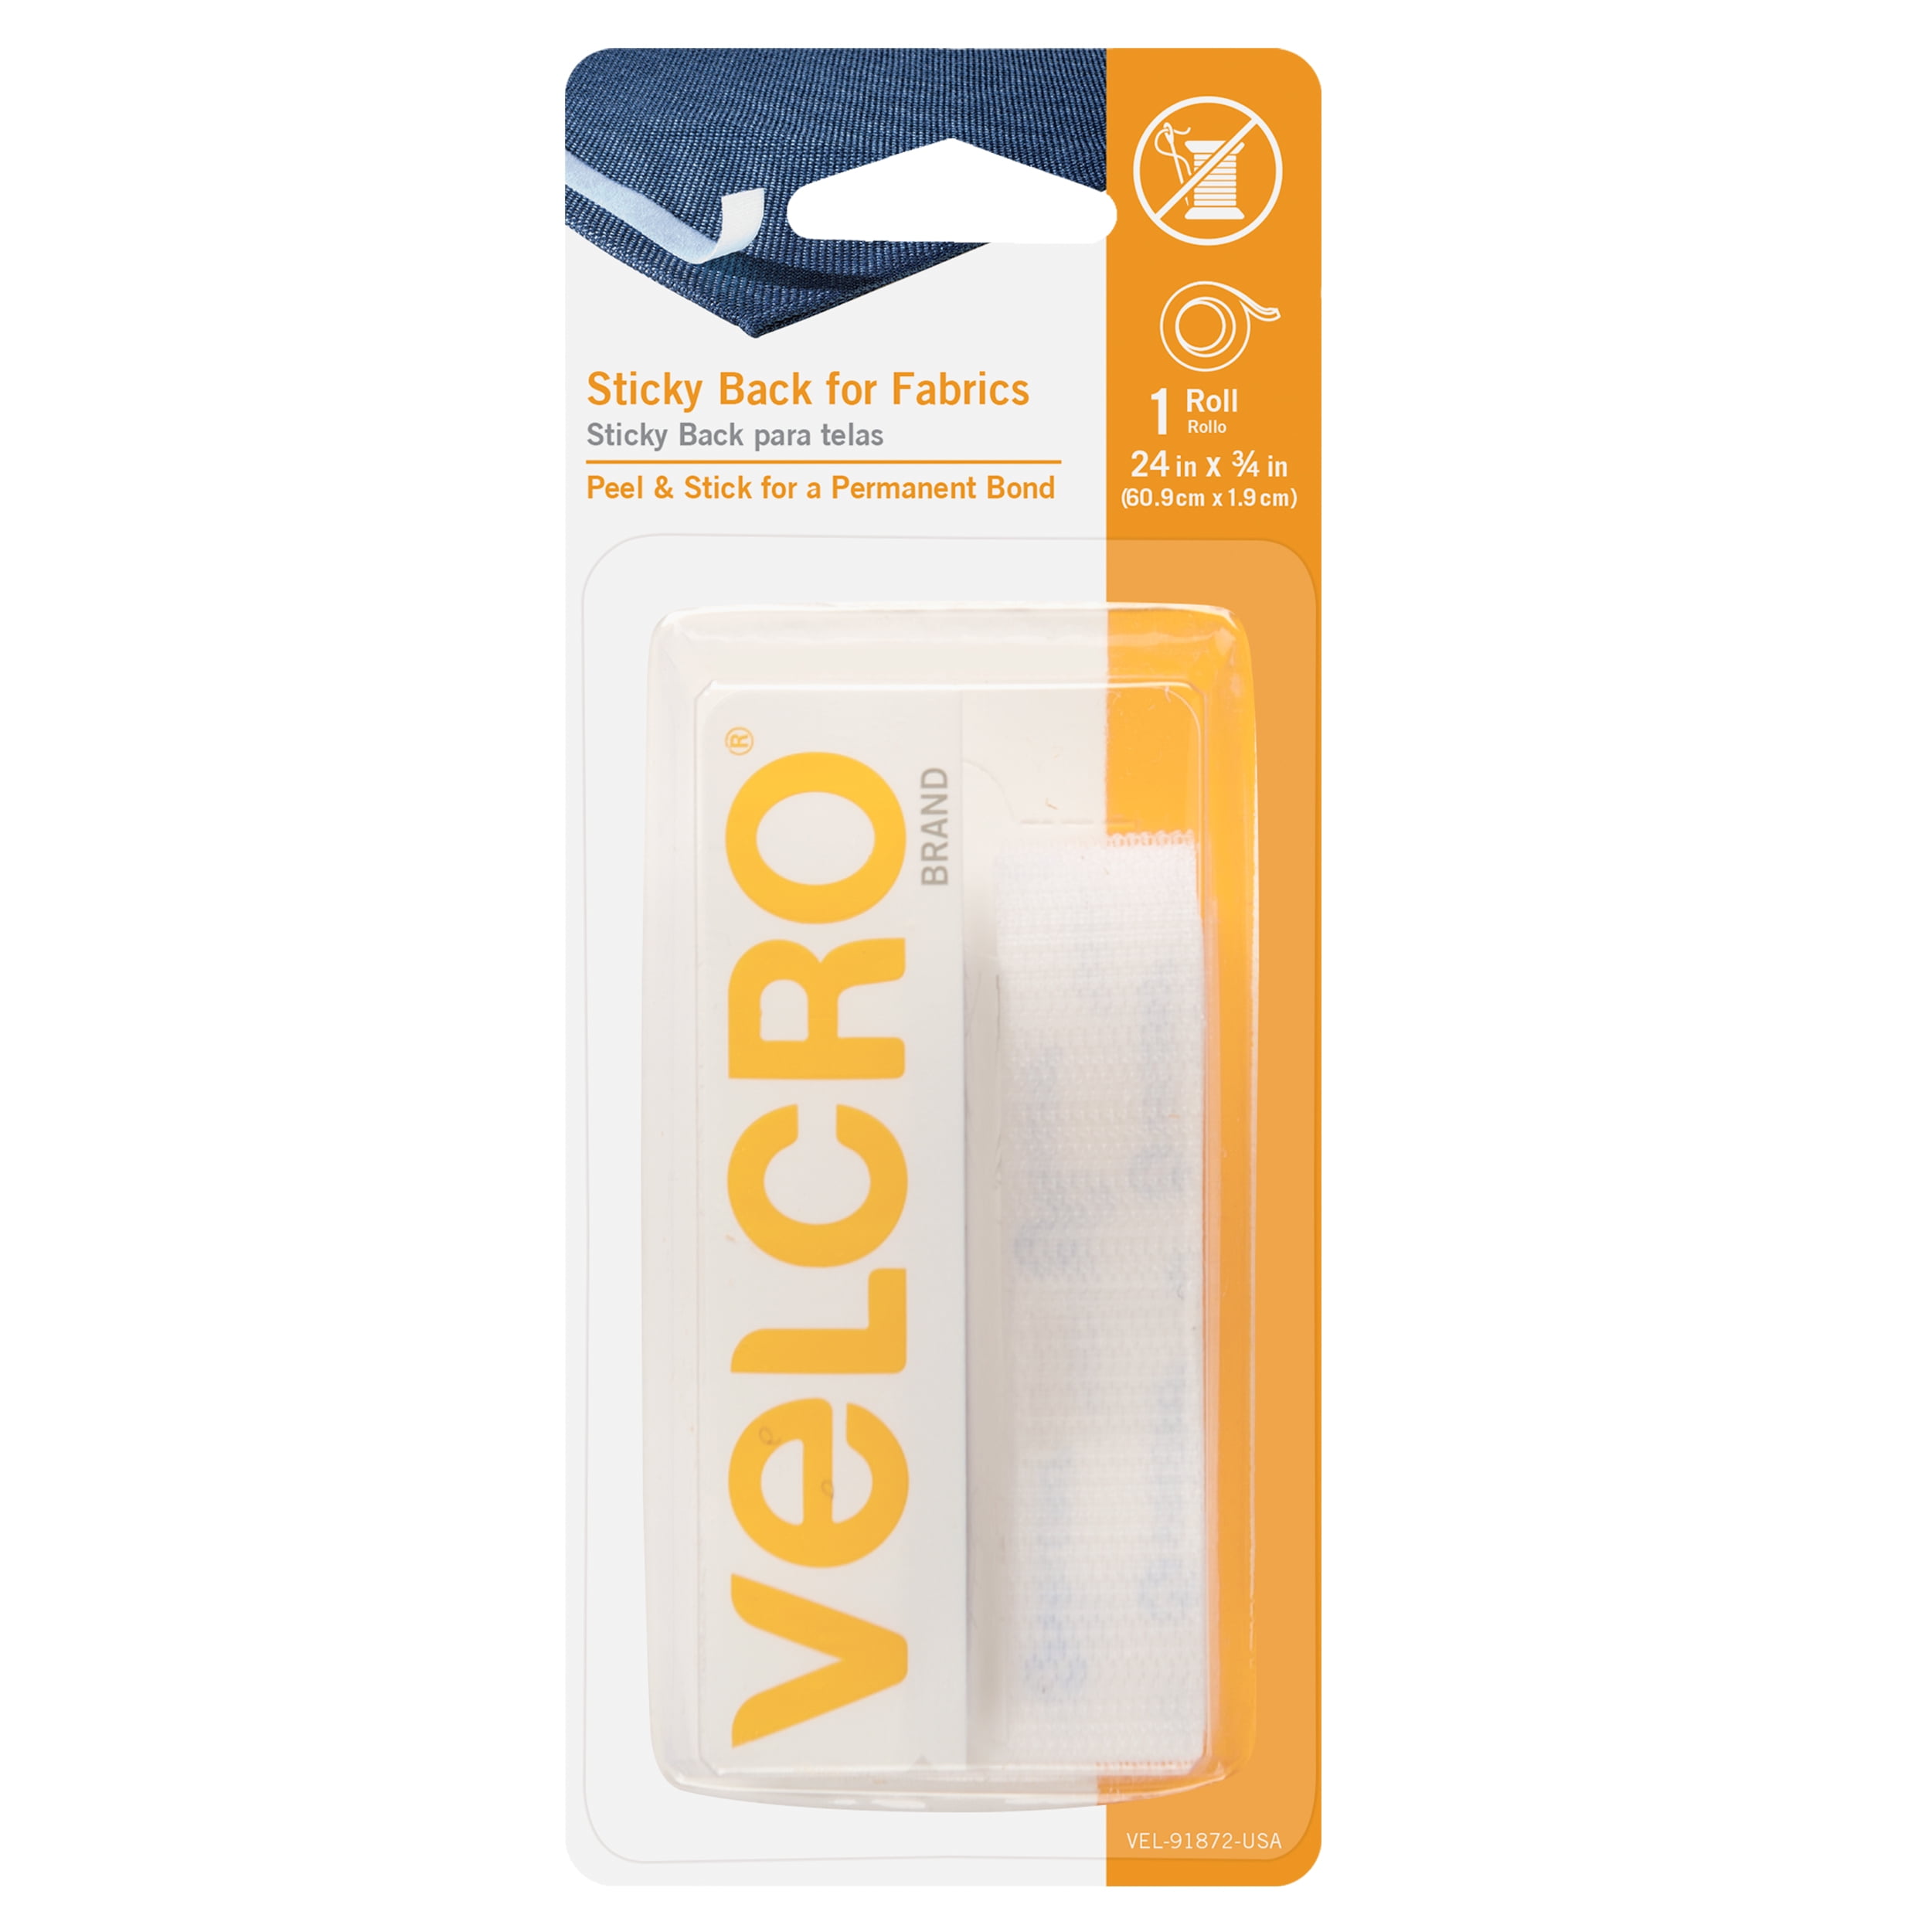 VELCRO Brand For Fabrics | Sew On Fabric Tape for Alterations and Hemming | No Ironing or Gluing | Ideal Substitute for Snaps and Buttons | 24in x 3/4in Roll White